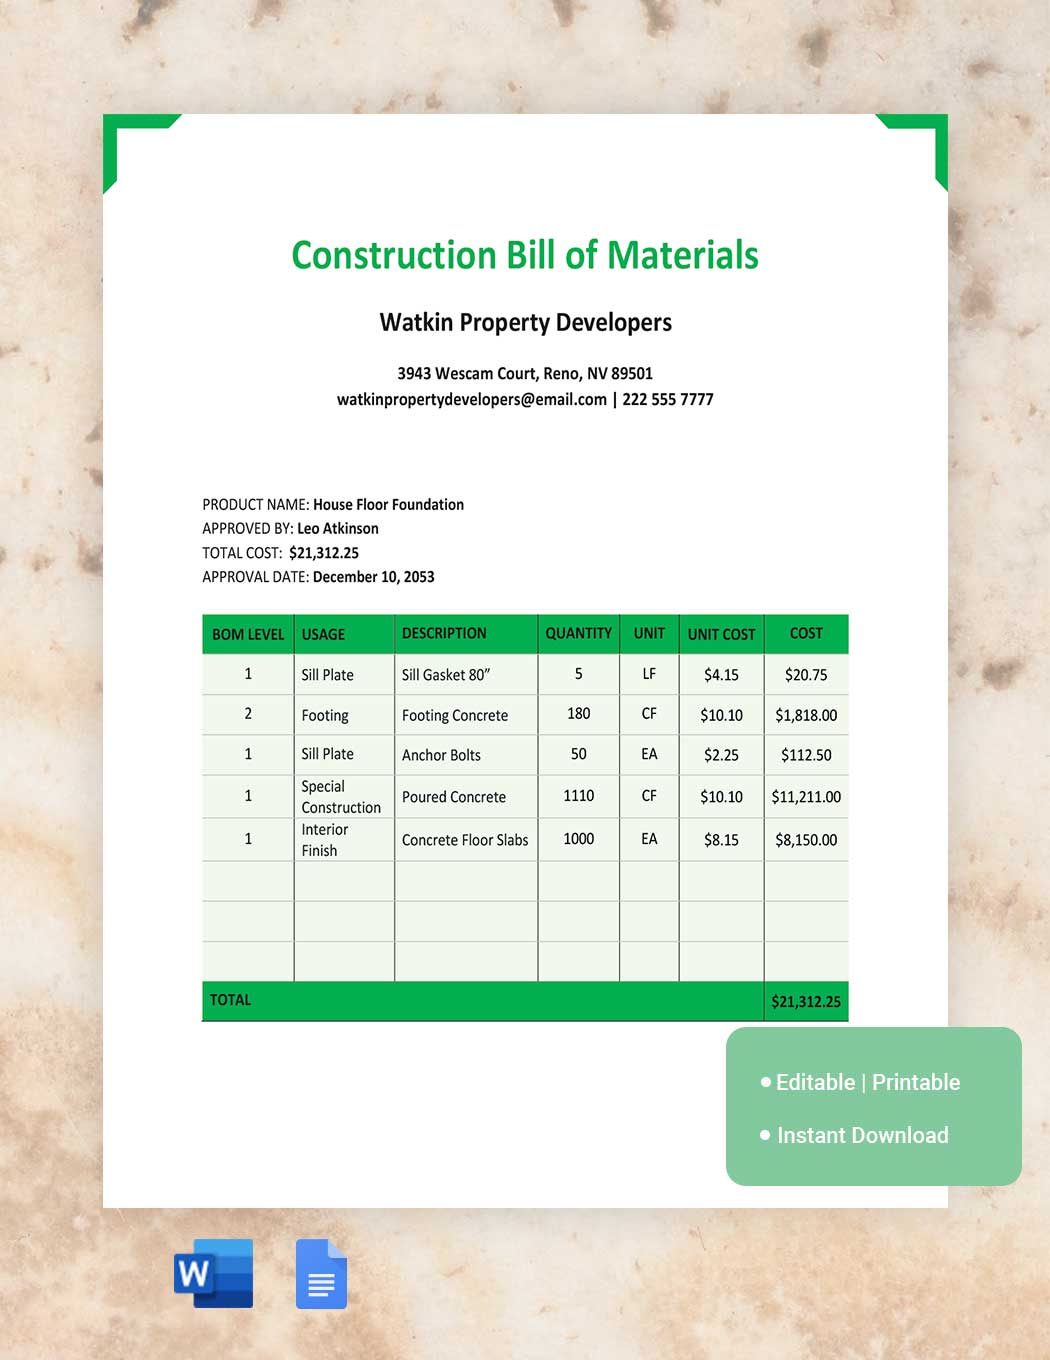 Construction Bill Of Materials Template in Word, Google Docs